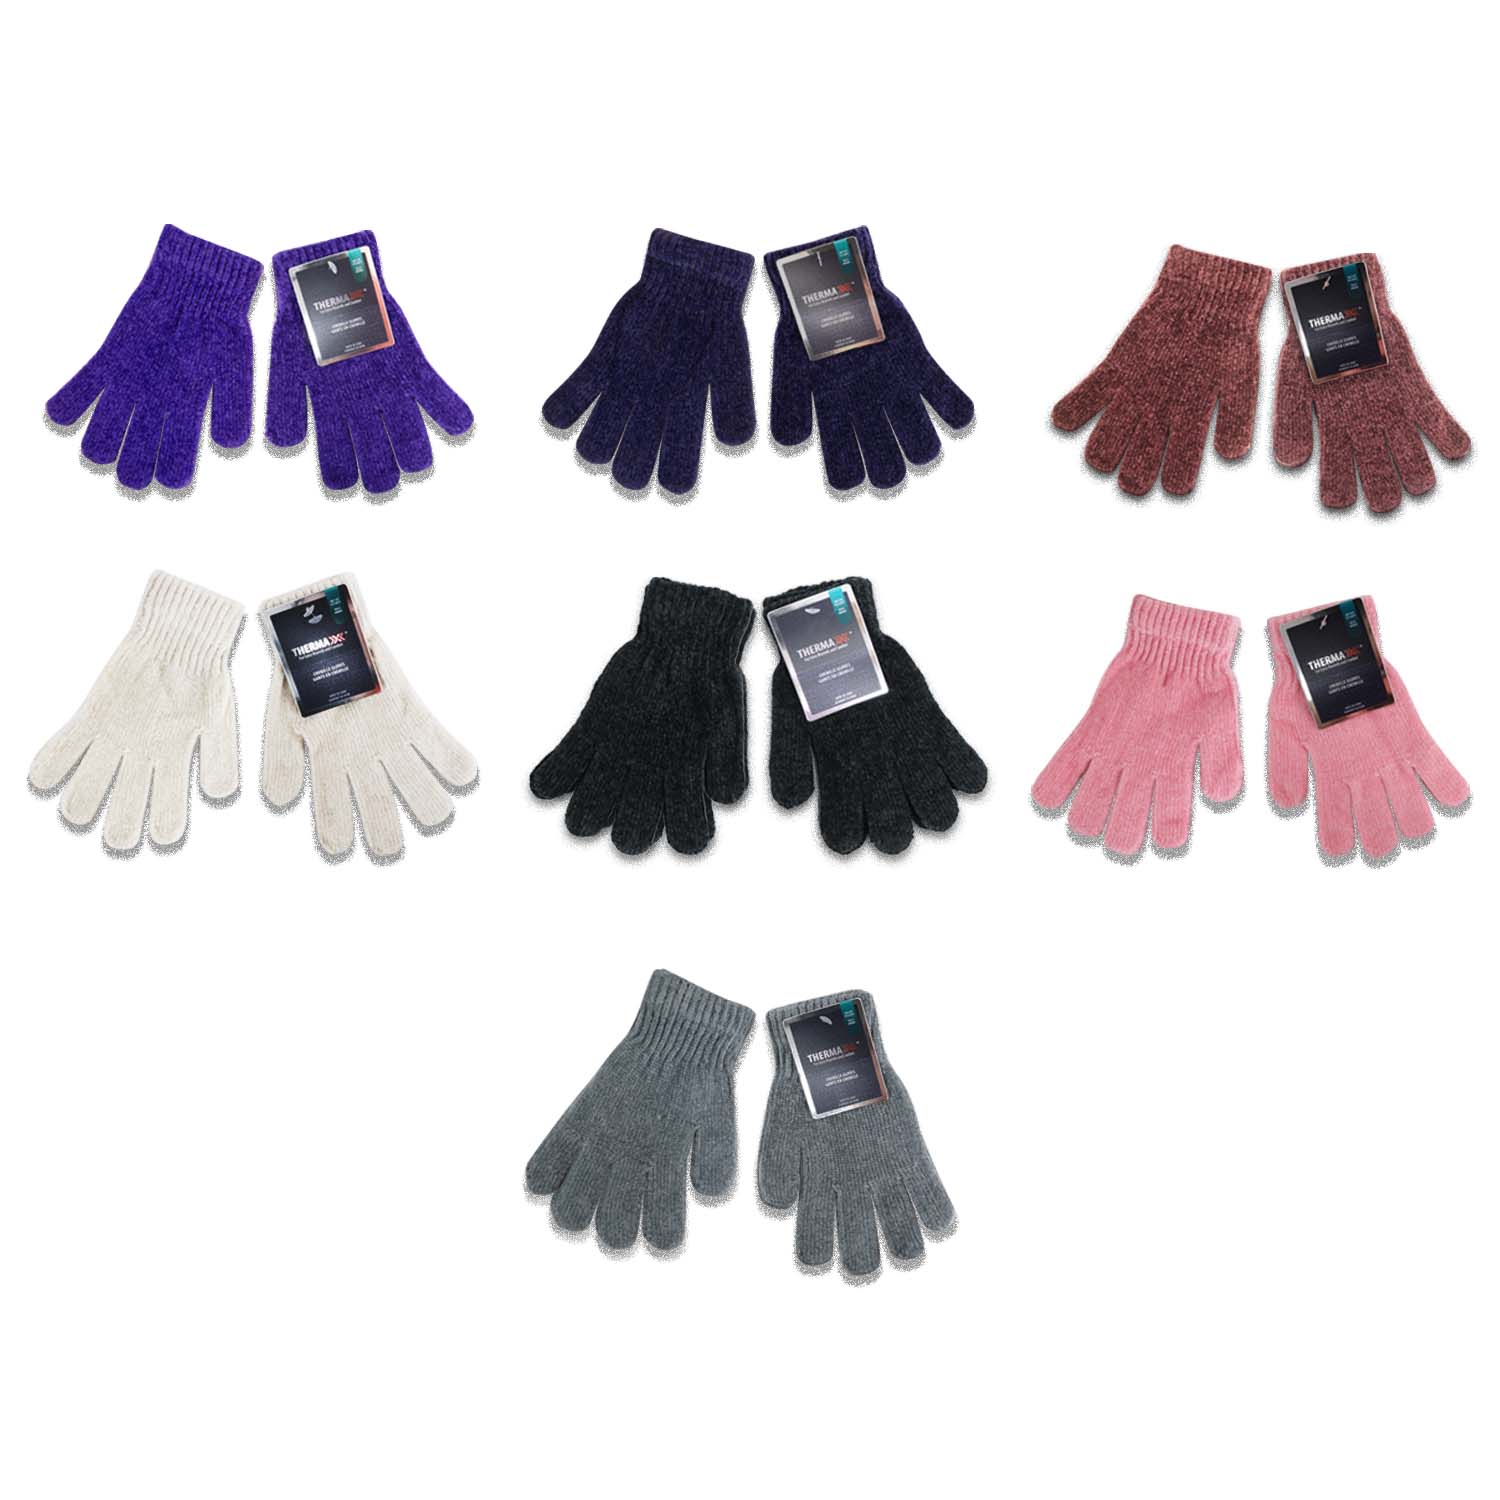 Unisex Wholesale Chenille Gloves in 7 Assorted Colors - Bulk Case of 96 Pairs